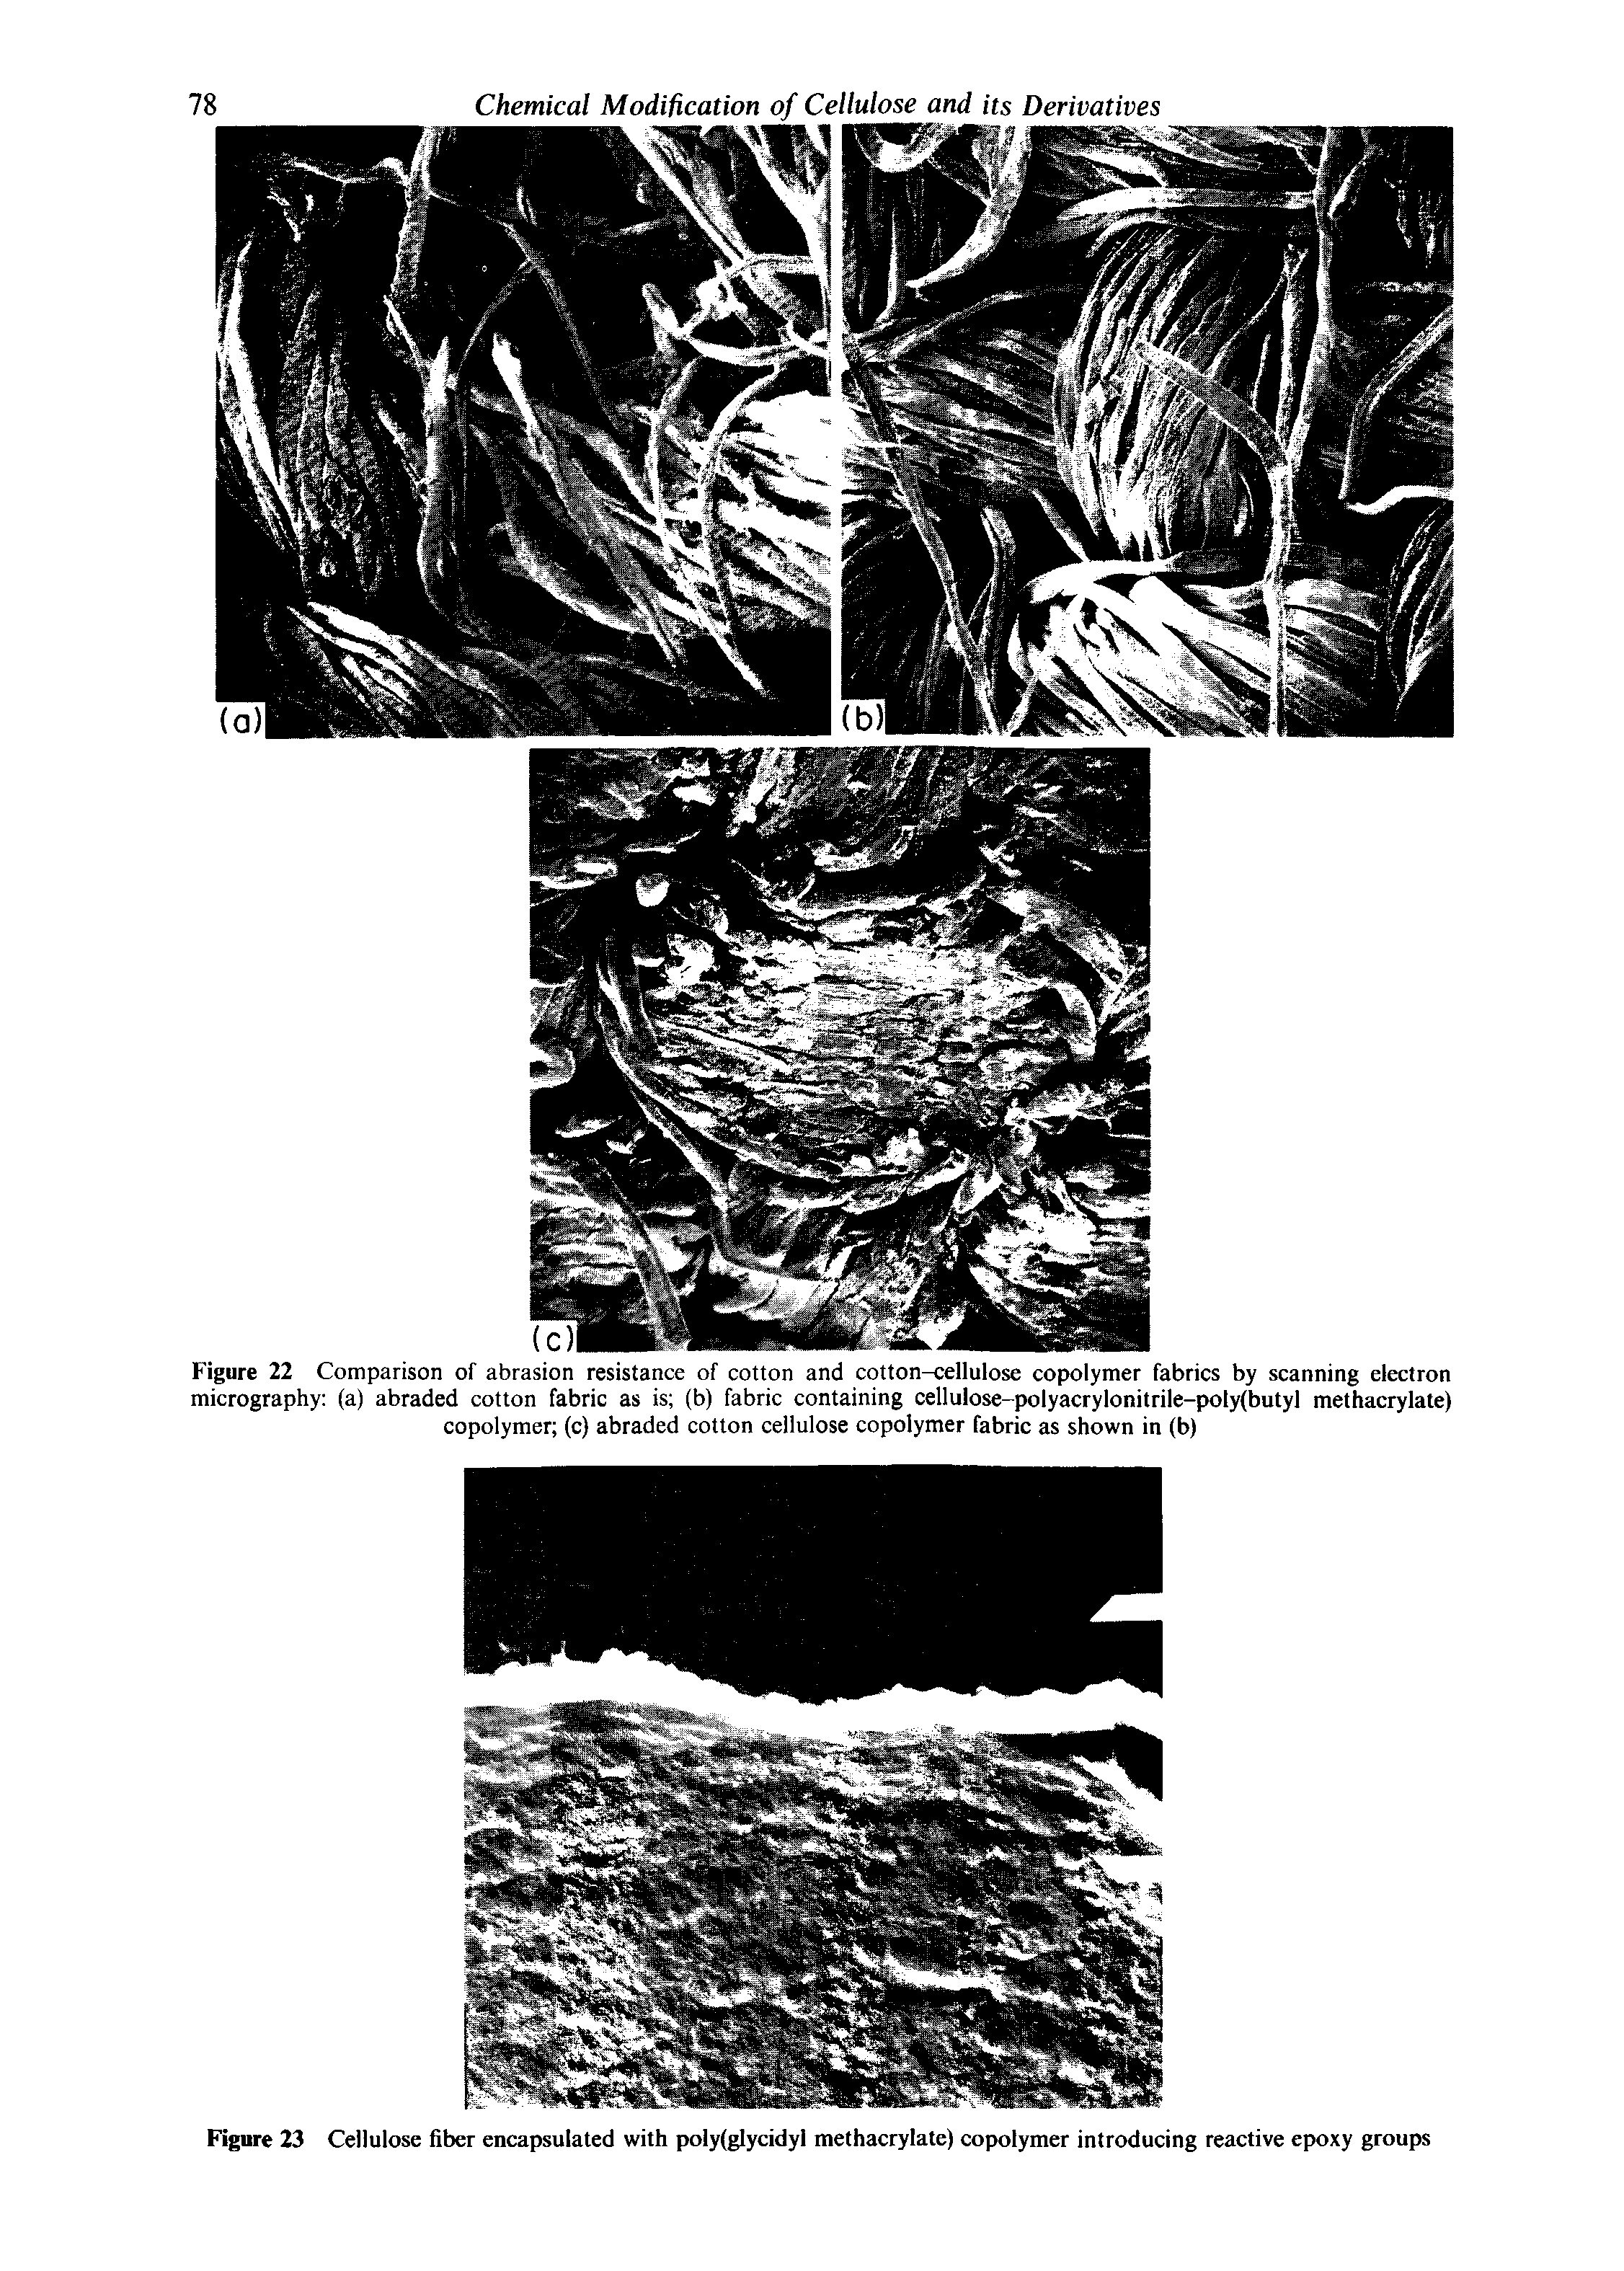 Figure 22 Comparison of abrasion resistance of cotton and cotton-cellulose copolymer fabrics by scanning electron micrography (a) abraded cotton fabric as is (b) fabric containing cellulose-polyacrylonitrile-poly(butyl methacrylate) copolymer (c) abraded cotton cellulose copolymer fabric as shown in (b)...